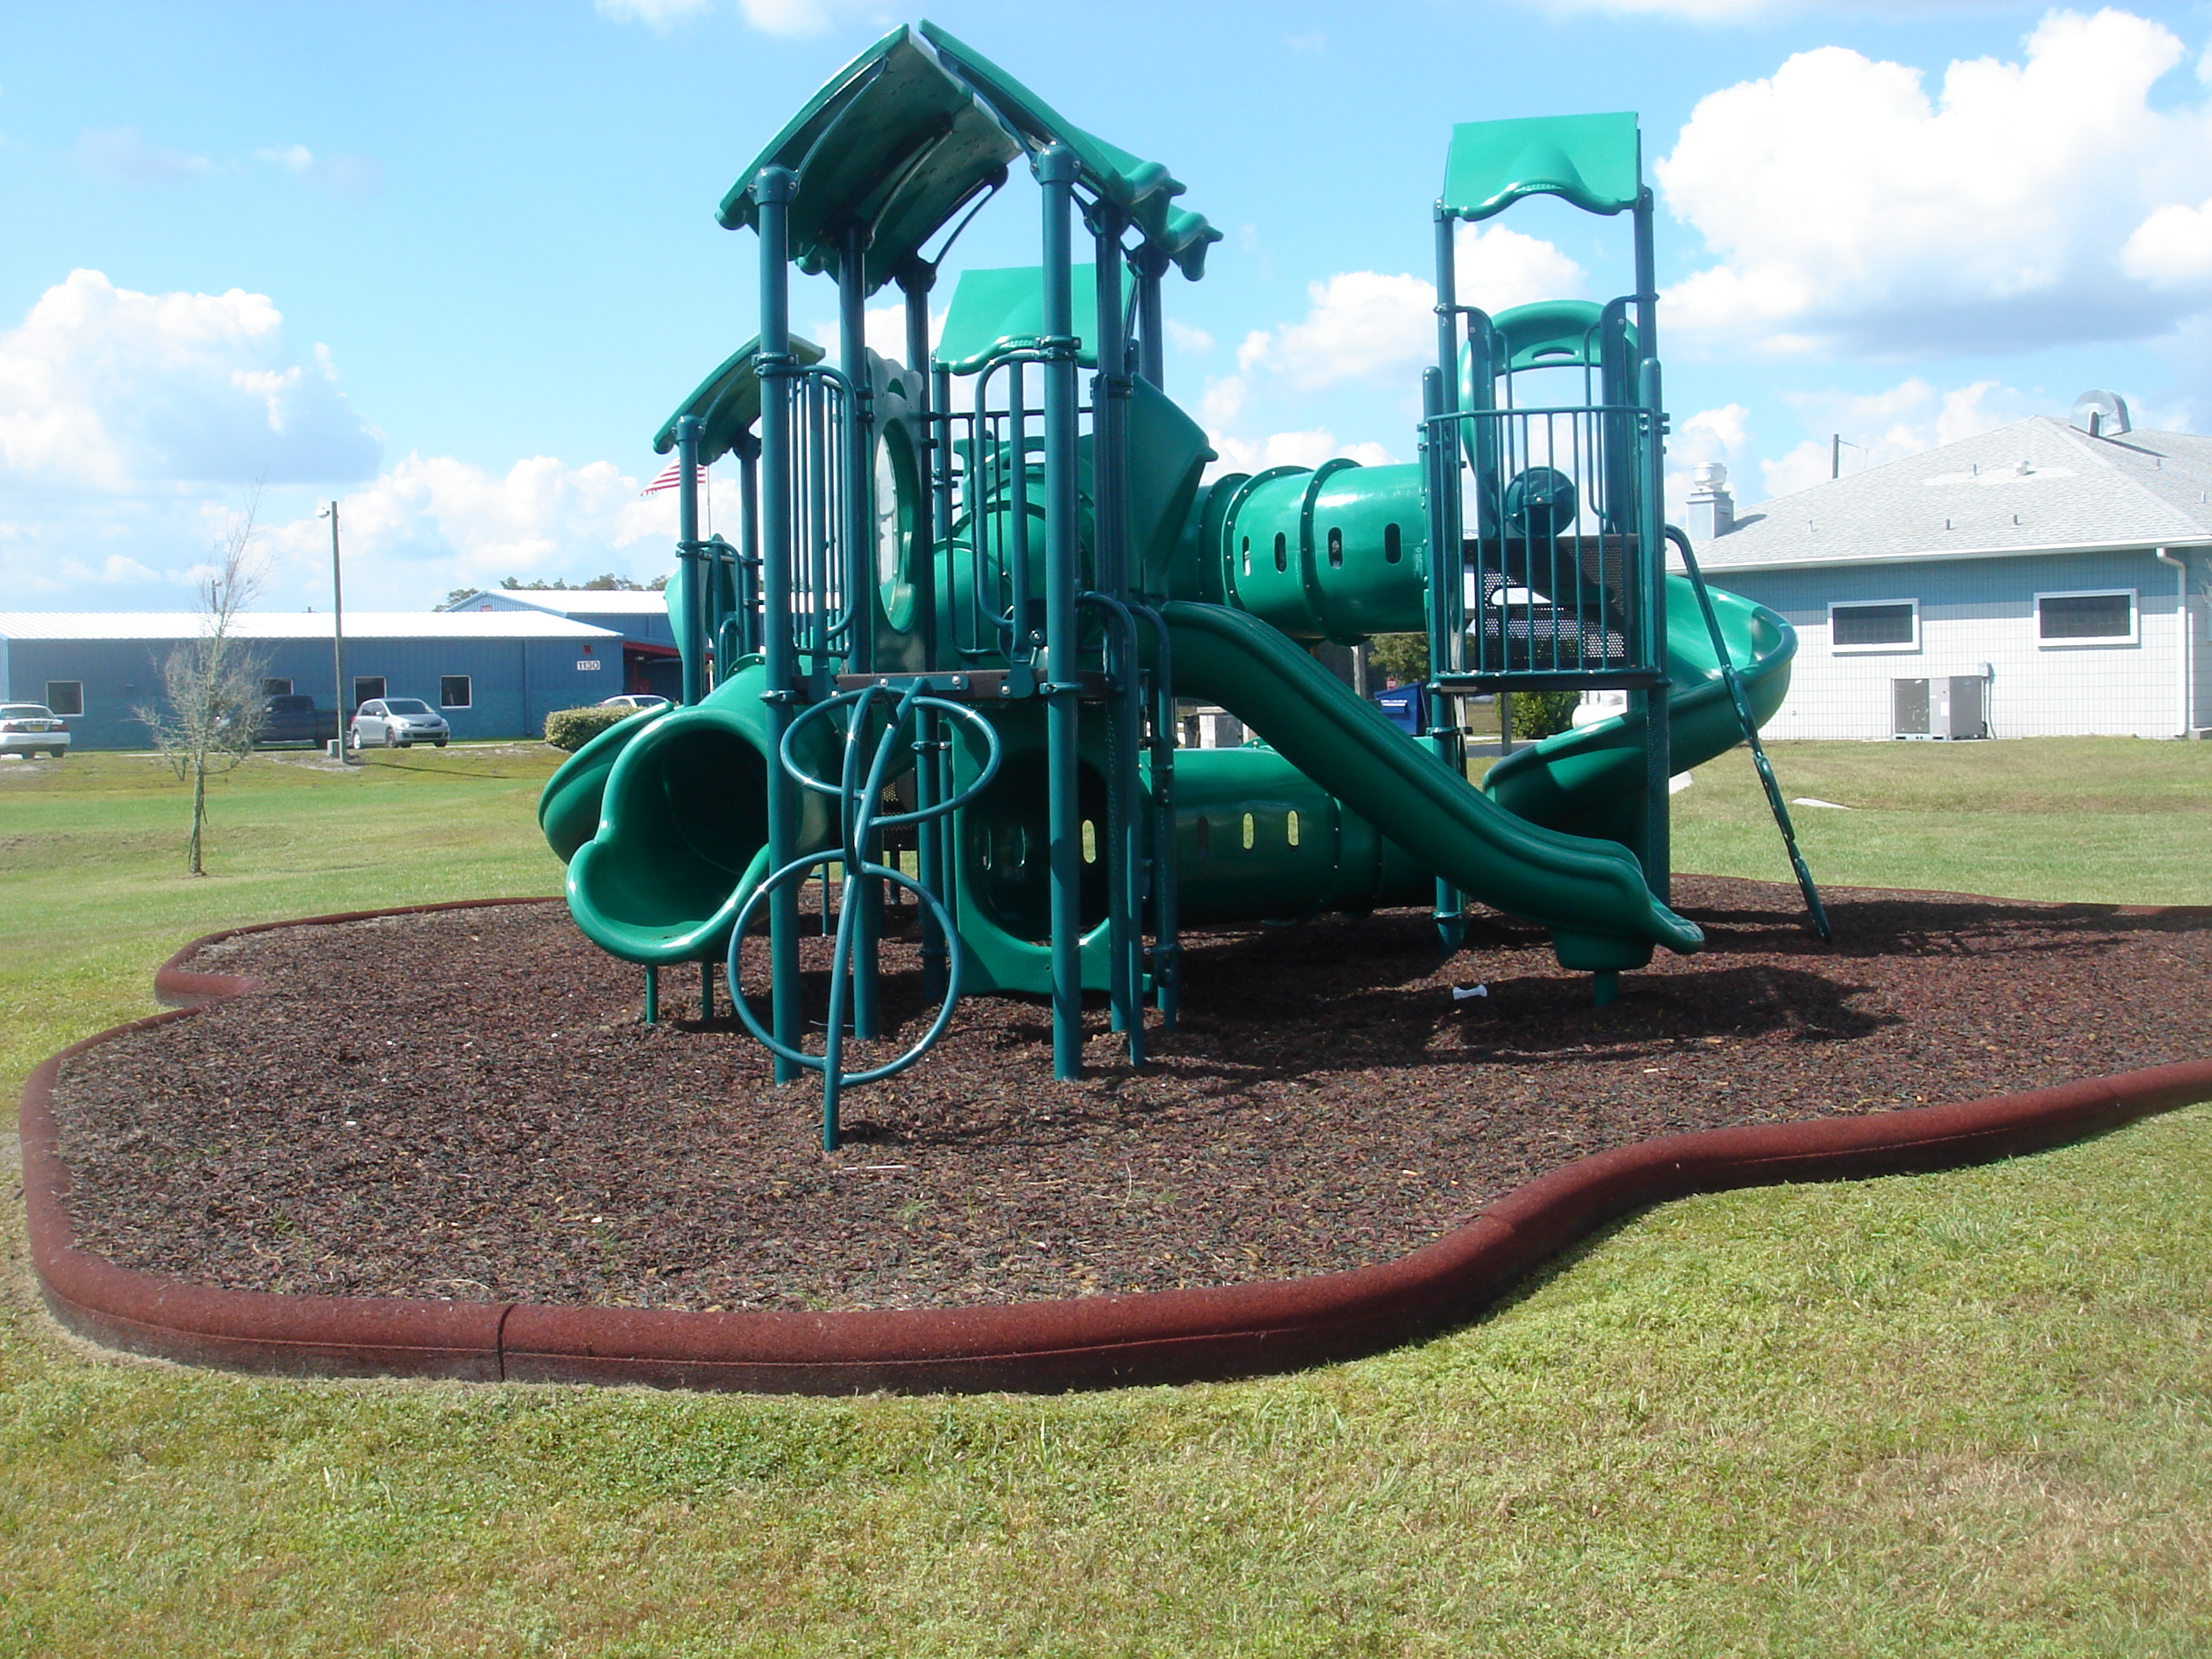 Why Rubber Mulch is an Affordable, Sustainable Option for Surfacing